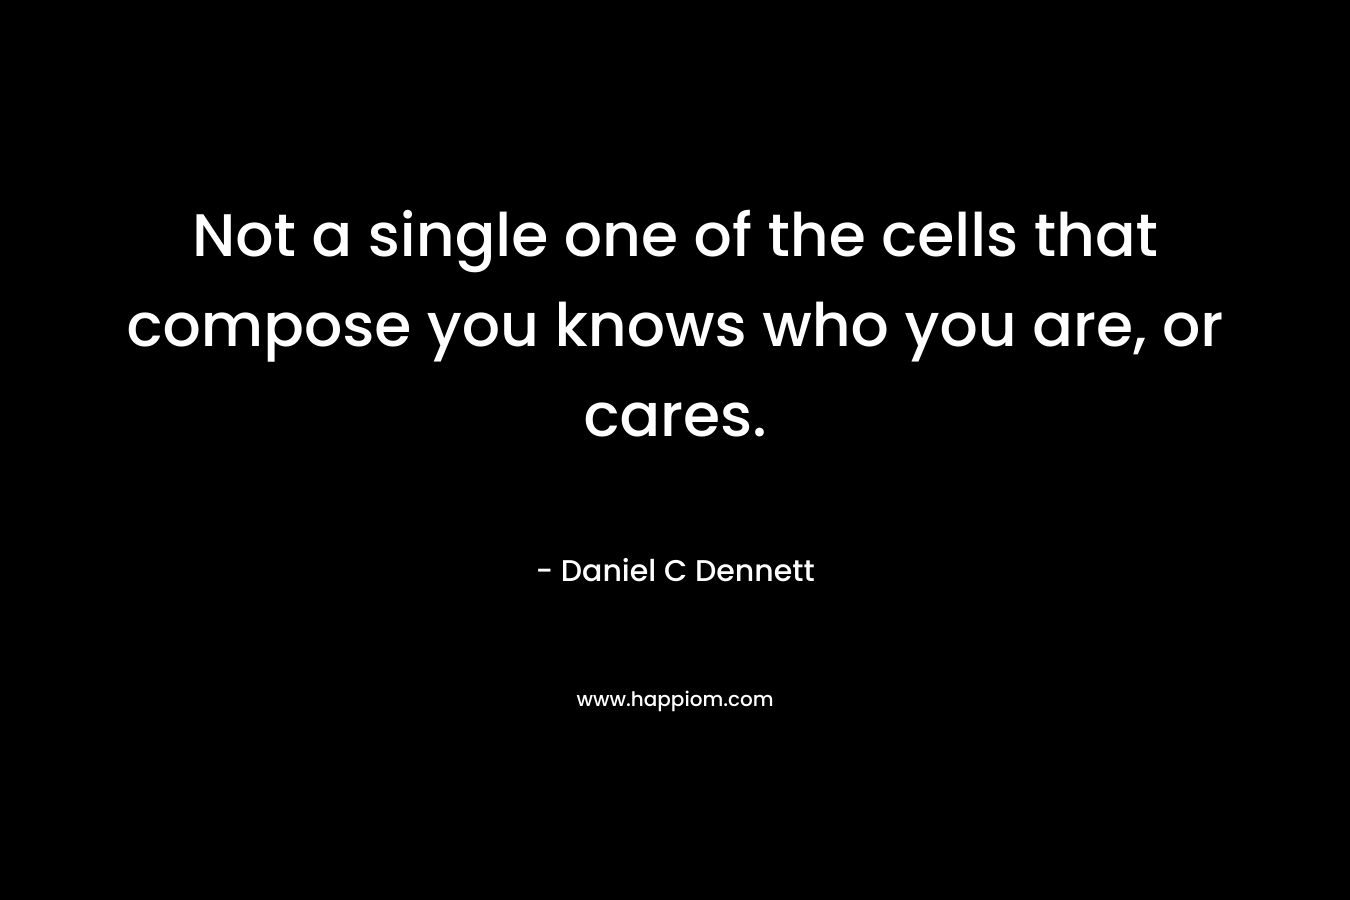 Not a single one of the cells that compose you knows who you are, or cares.